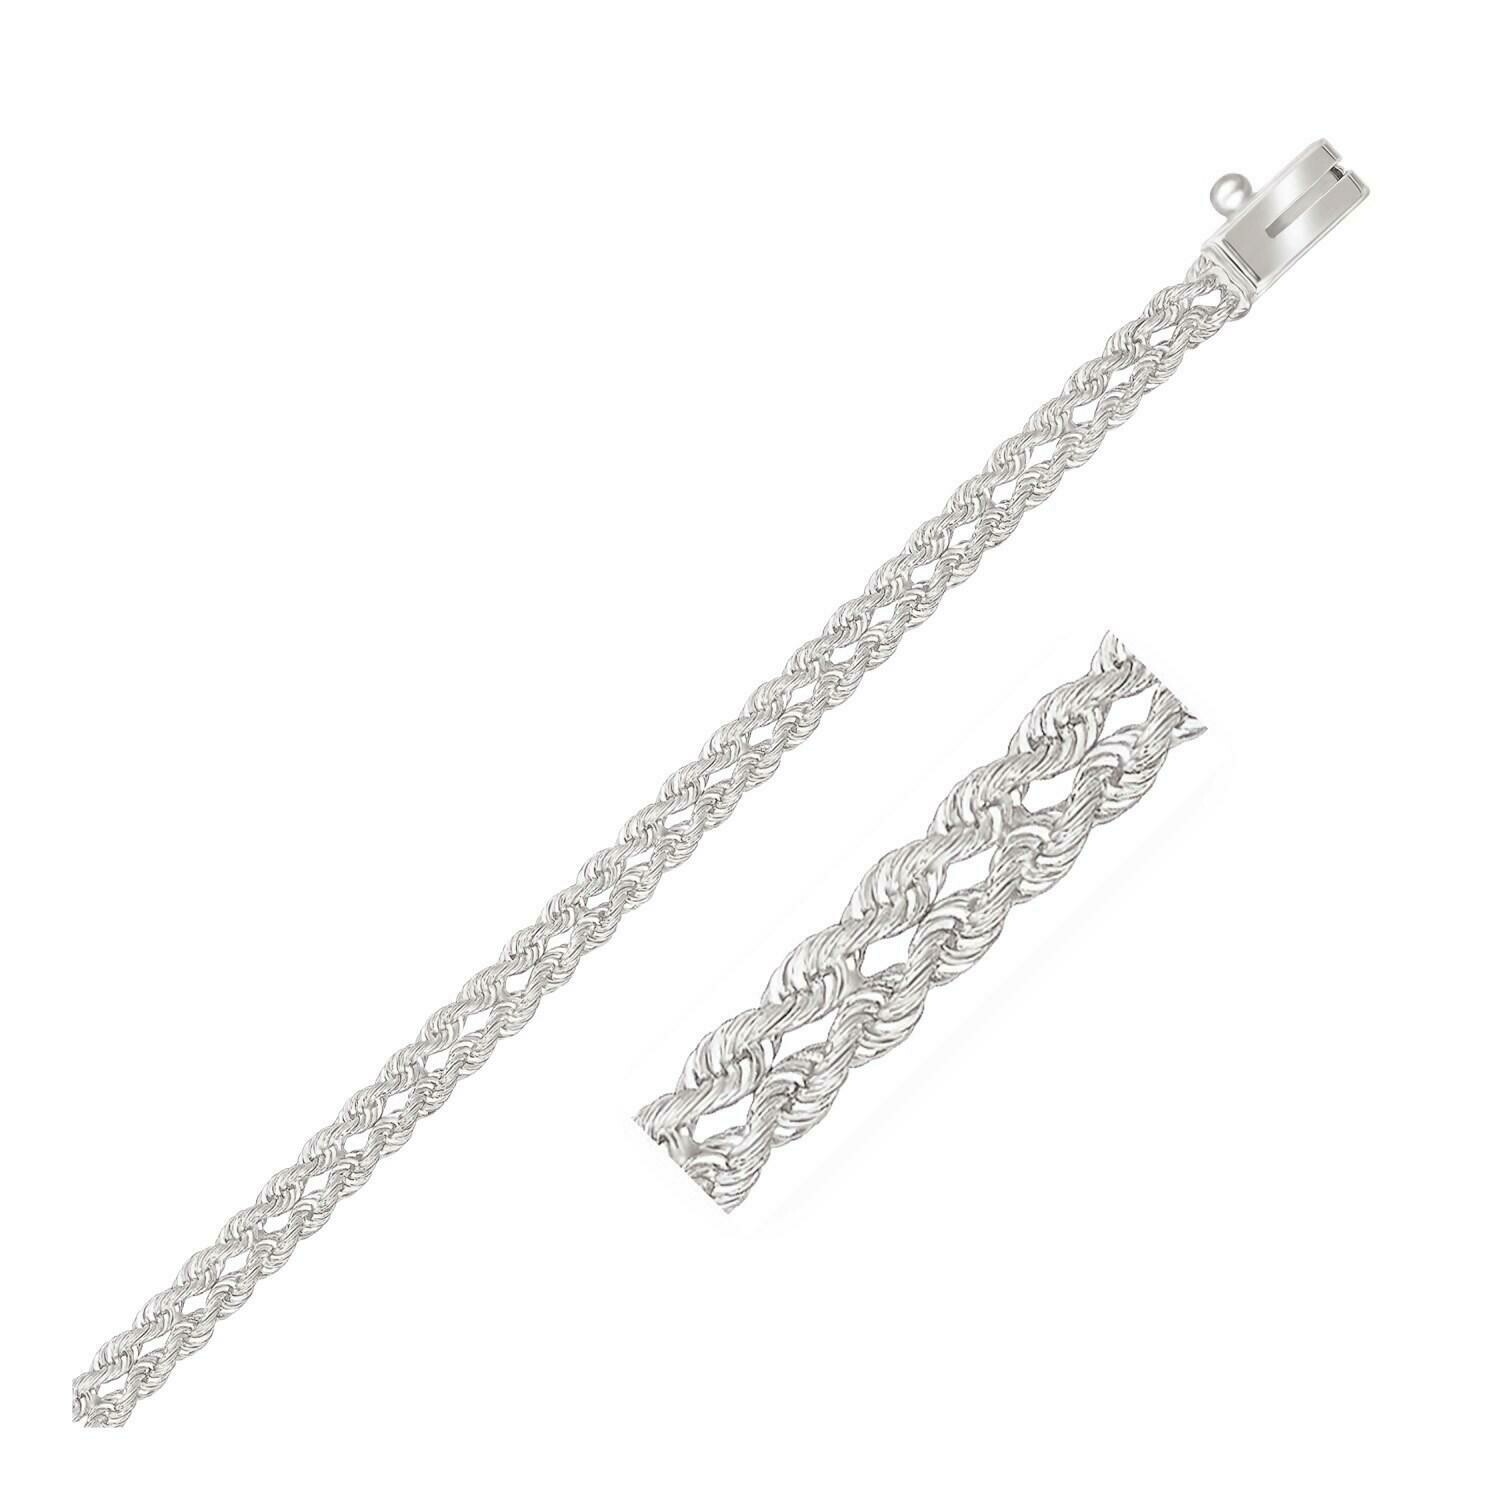 3.0 mm 14k White Gold Two Row Rope Bracelet, Size: 8&quot;